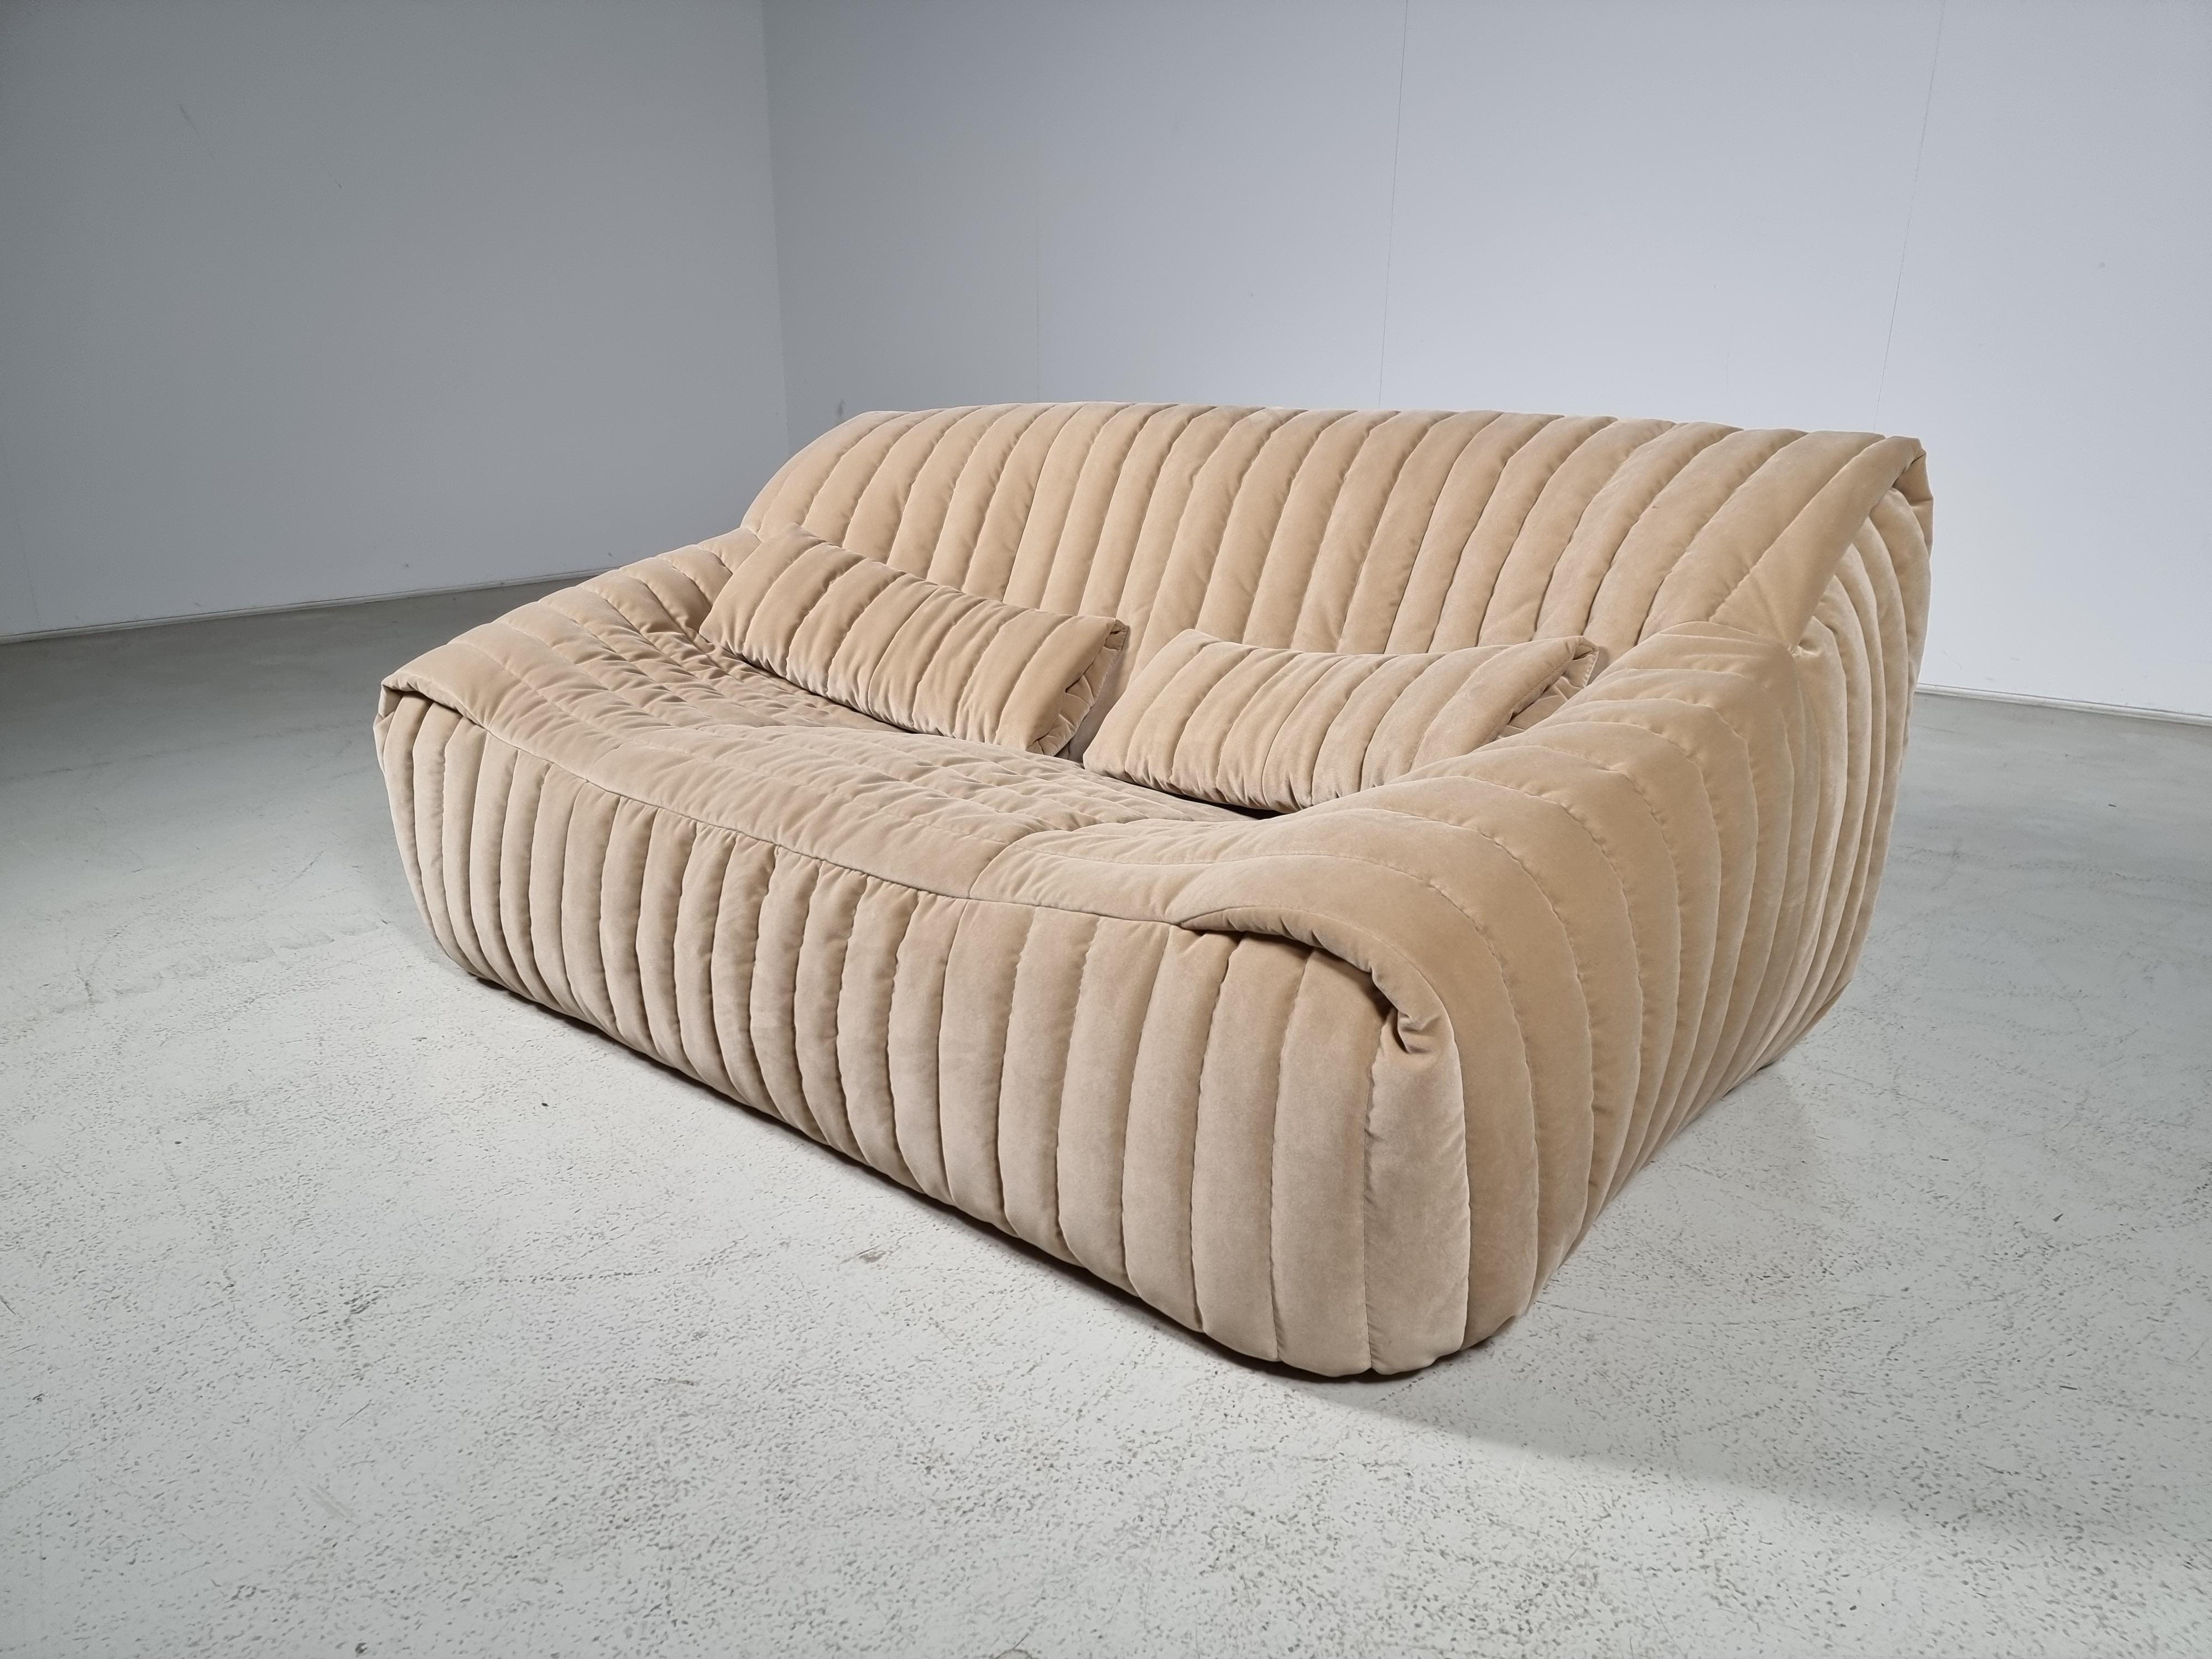 The Sandra sofa was designed by Annie Hiéronimus for Cinna after she joined the Roset Bureau d'Etudes in 1976.

Constructed fully from foam, the sofa has a solid form. Reupholstered in a beige velvet fabric. It's extremely comfortable. 


